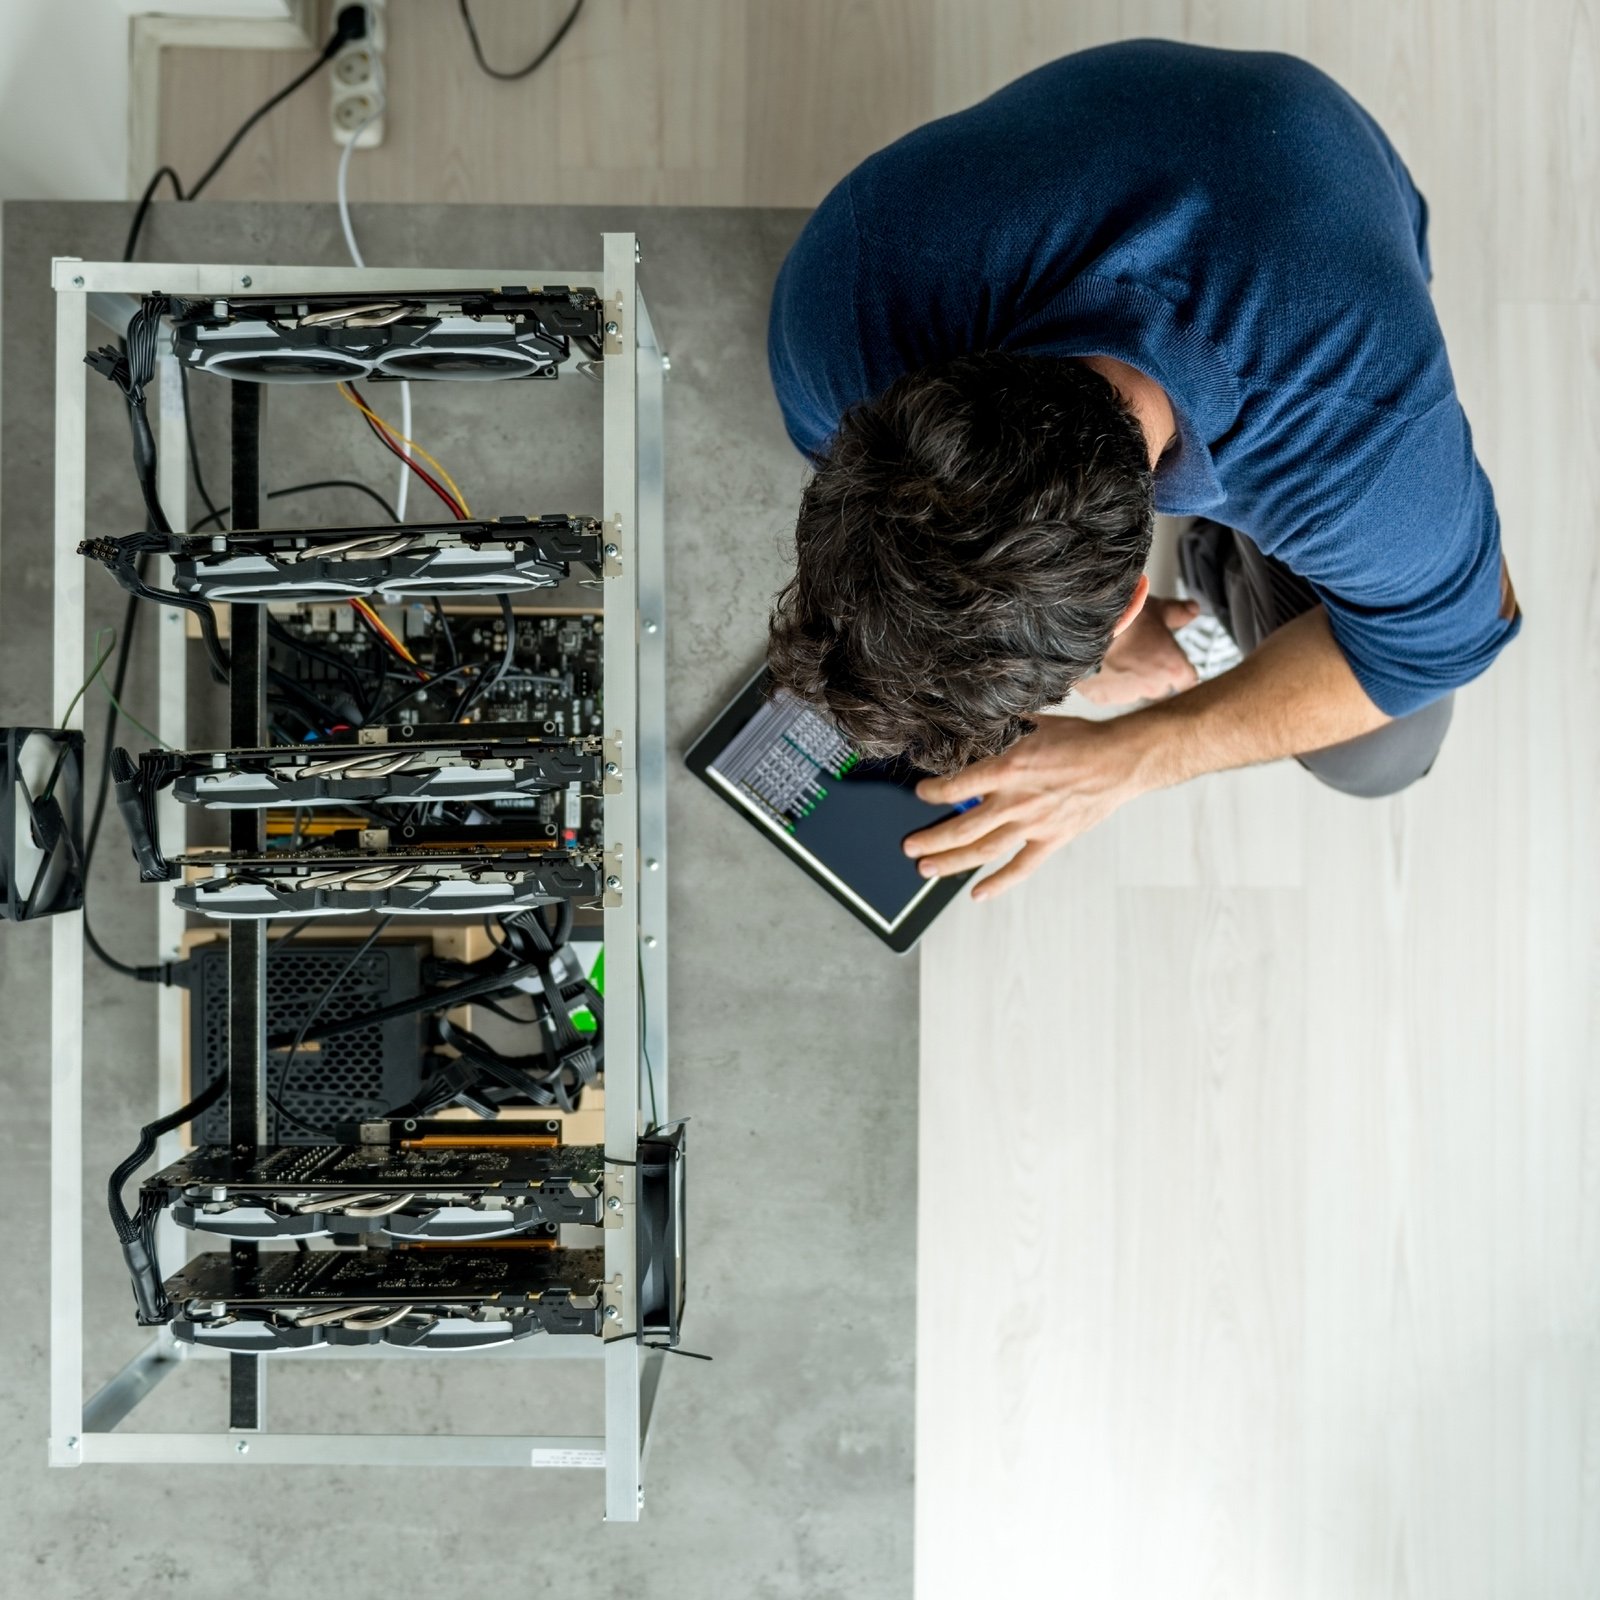 A Guide to Building Your Own Crypto Mining Rig